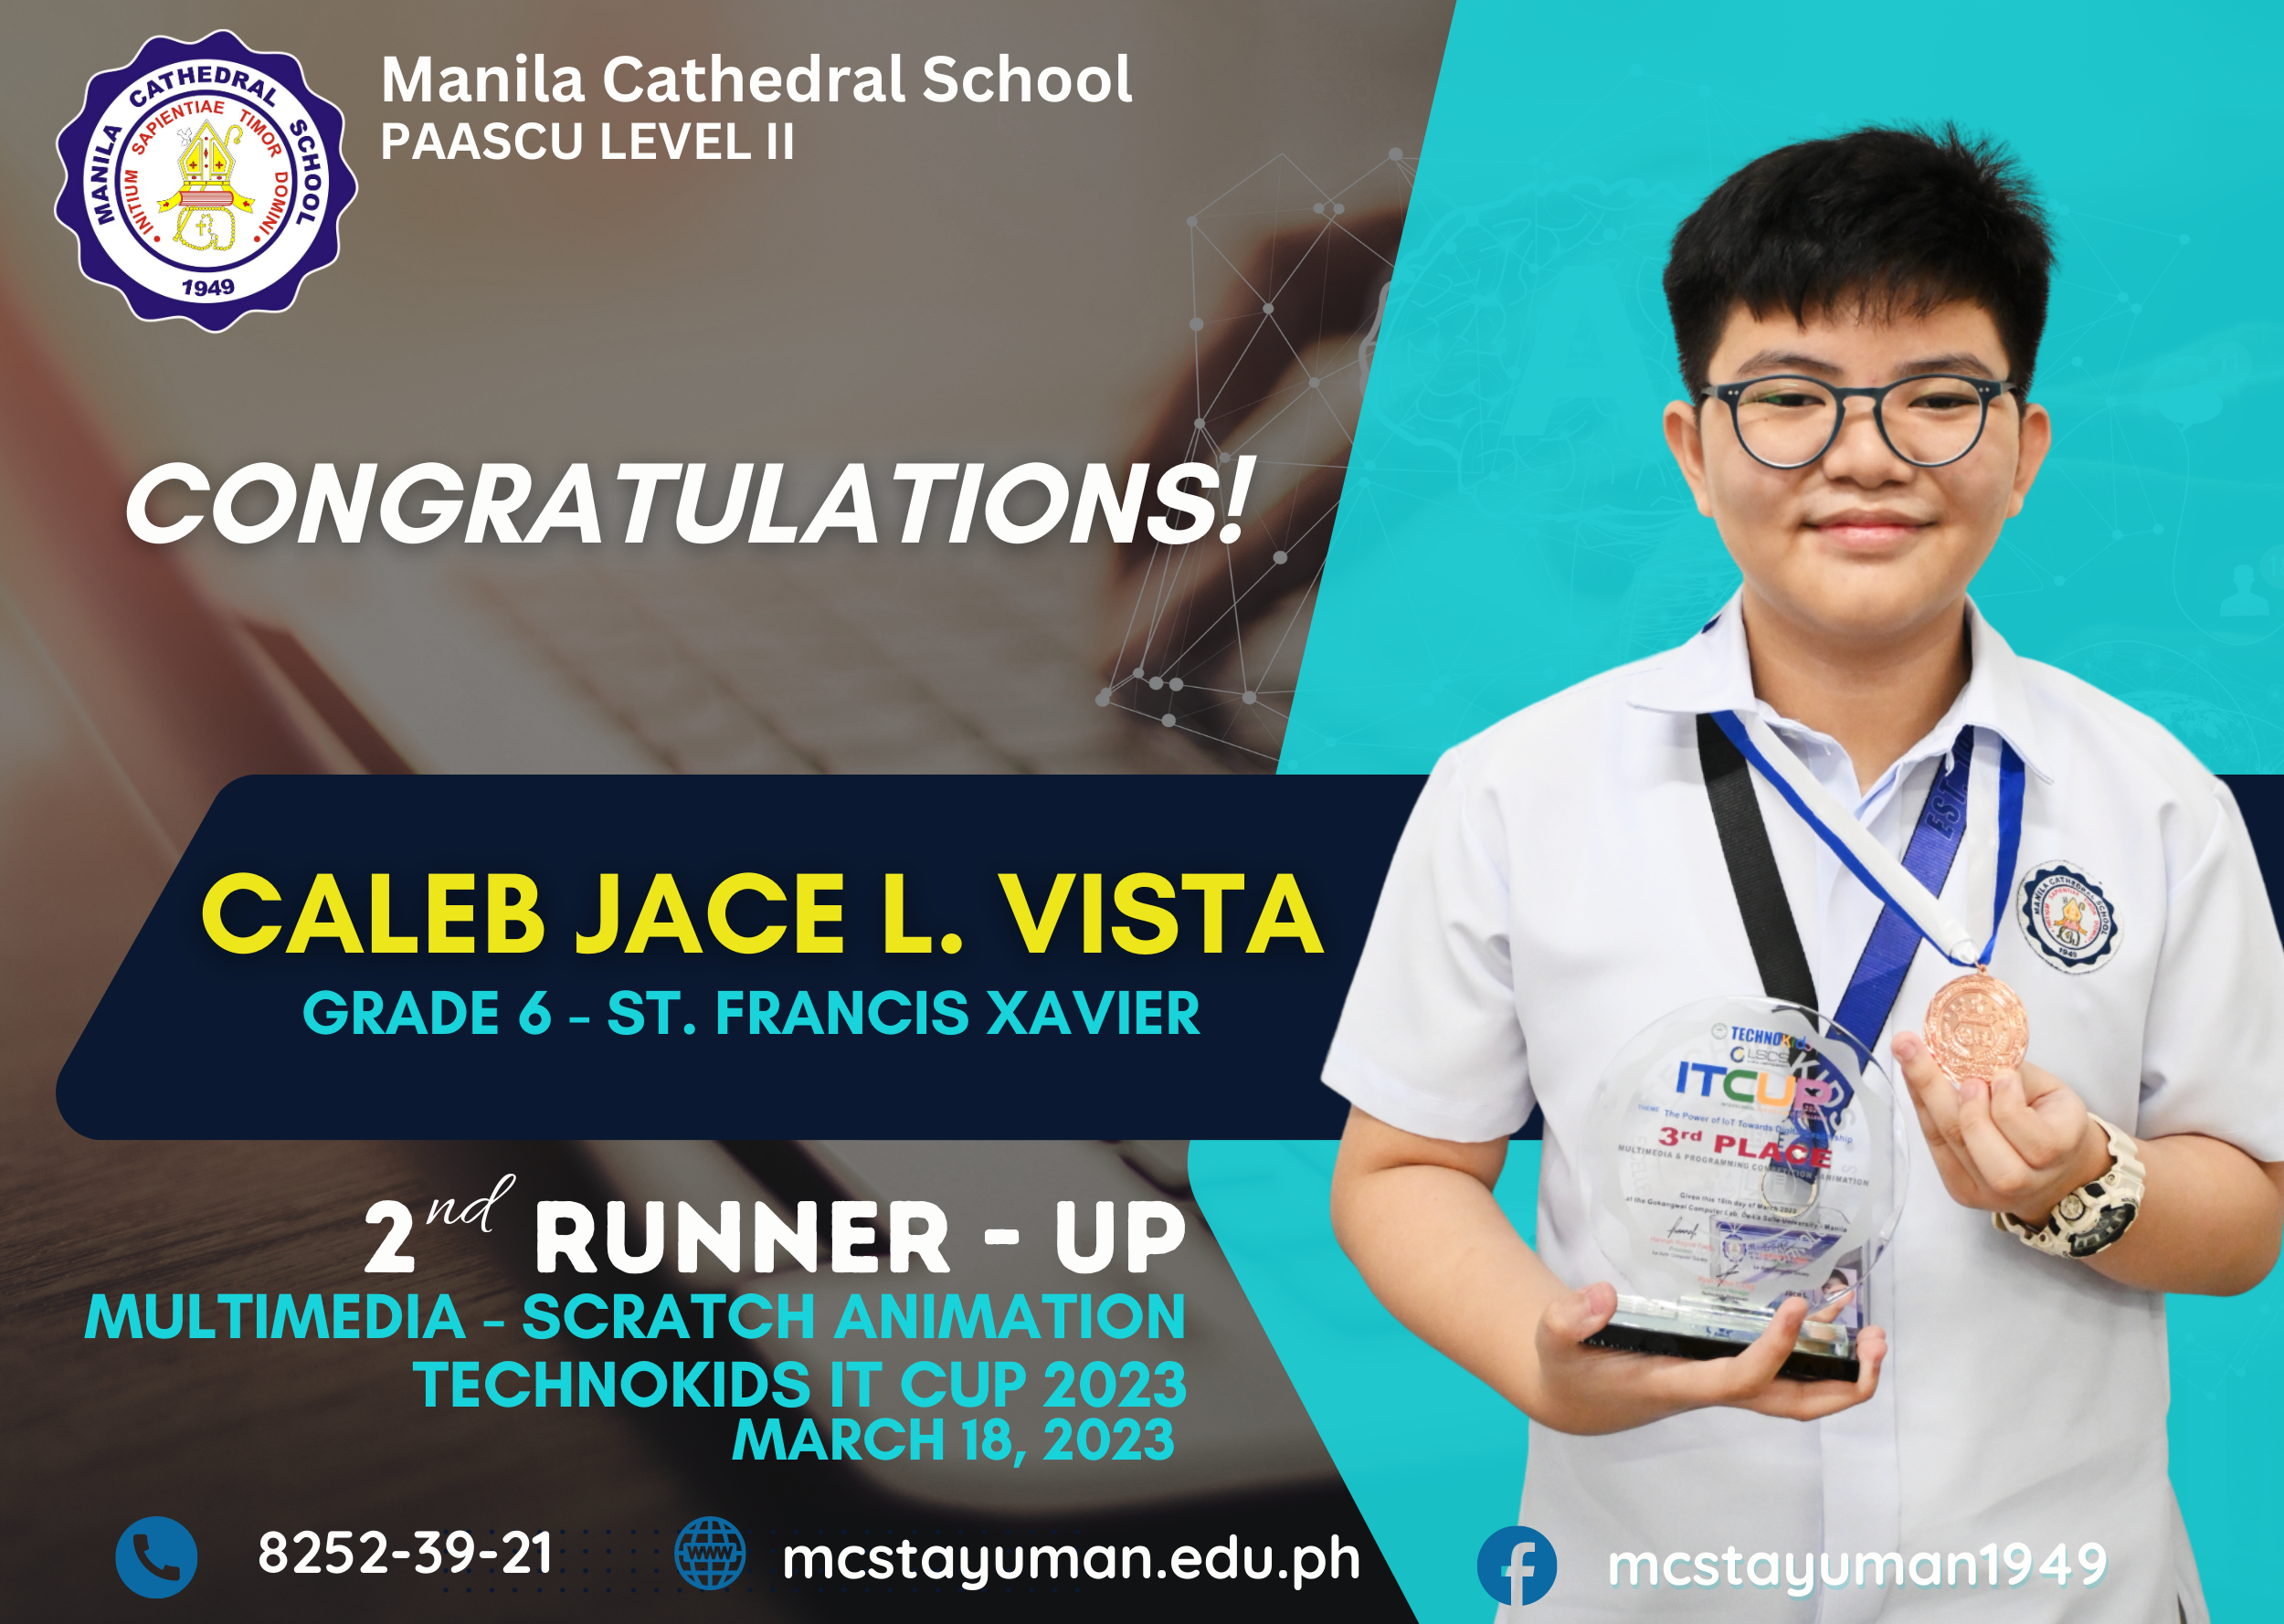 Manila Cathedral School congratulates Caleb Jace L. Vista for acing the Multimedia-Scratch Animation, Technokids IT Cup 2023 last March 18, 2023. Congratulations on your 2nd Runner-Up finish, Caleb! Y